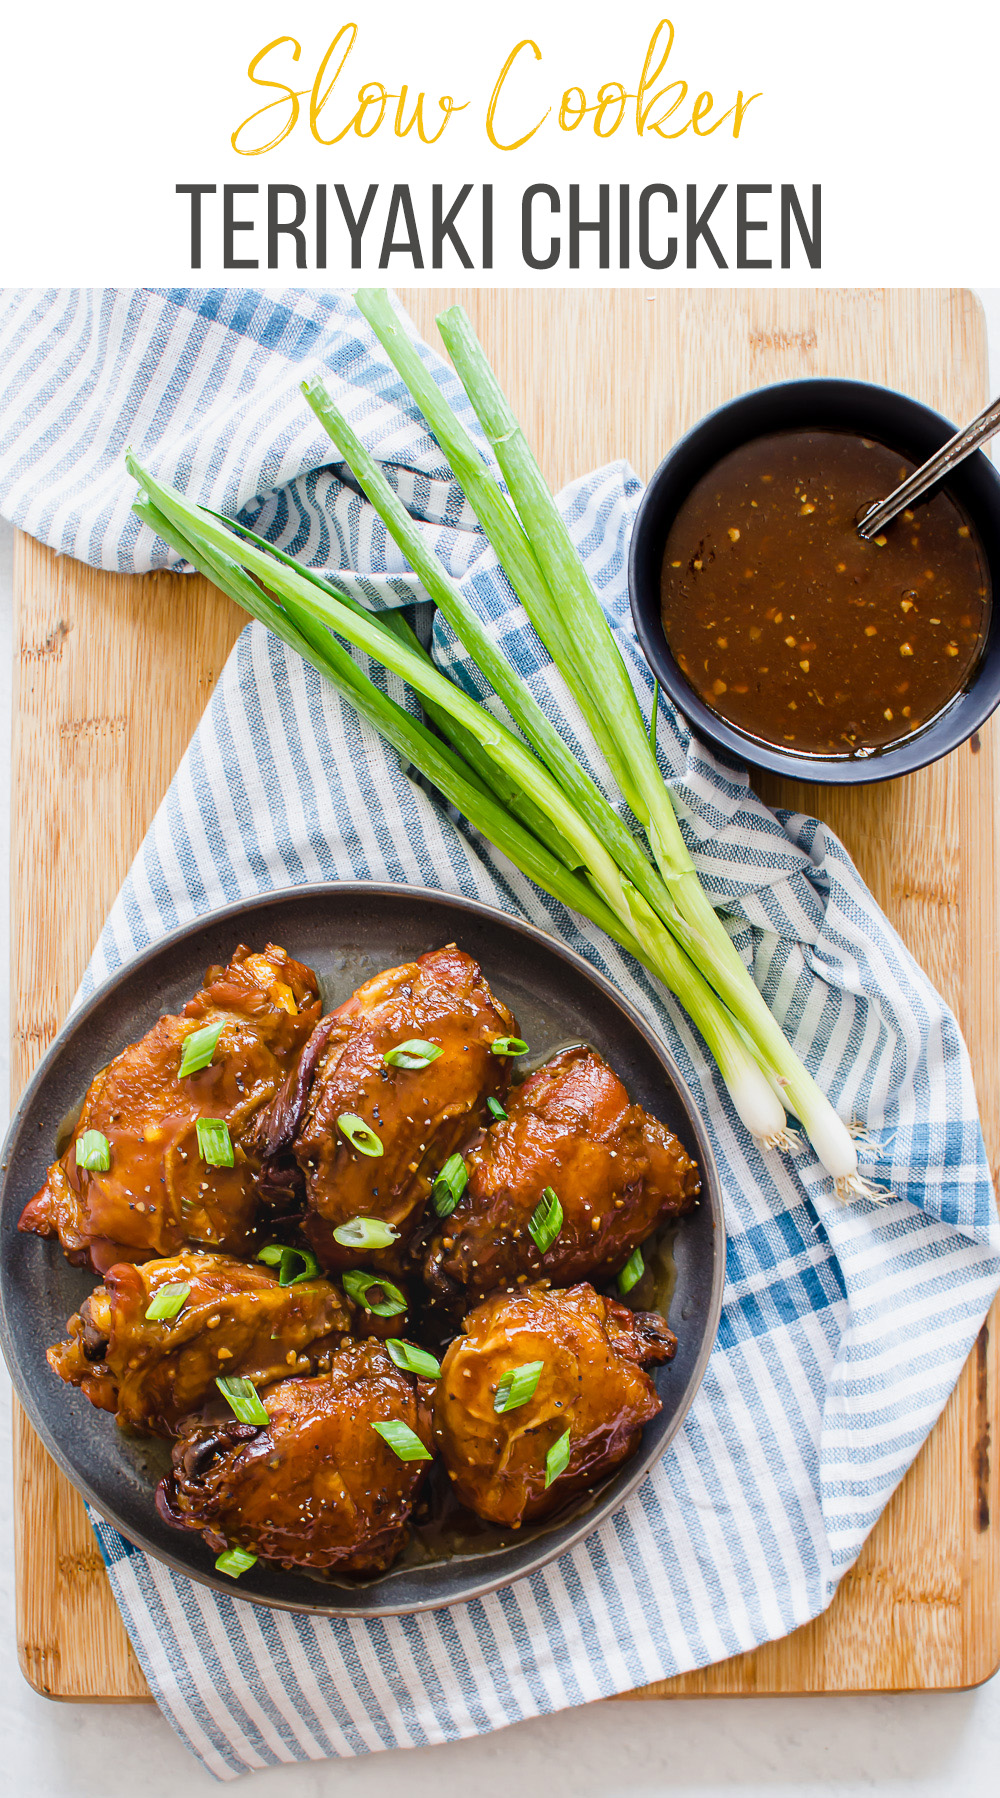 Teriyaki chicken thighs on a grey plate garnished with sliced green onion.